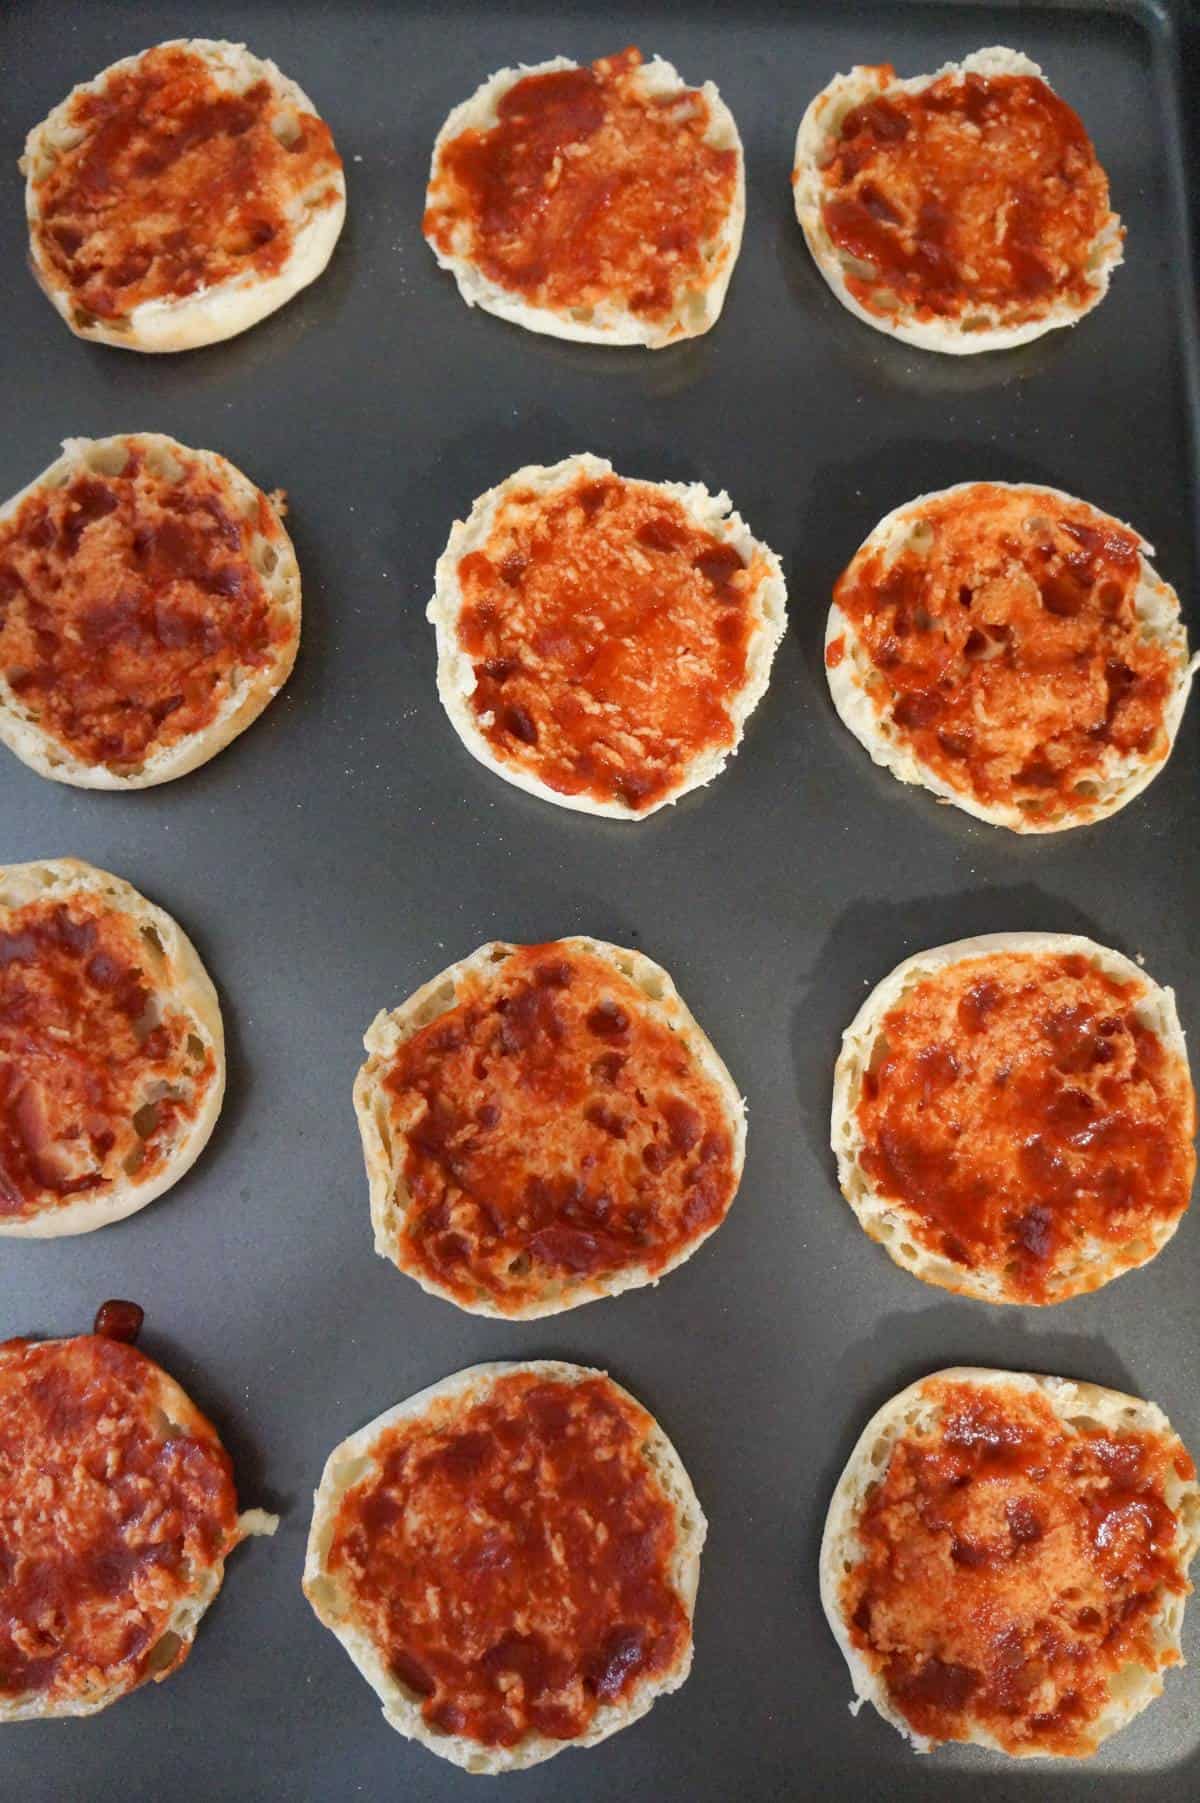 English muffins spread with Heinz chili sauce